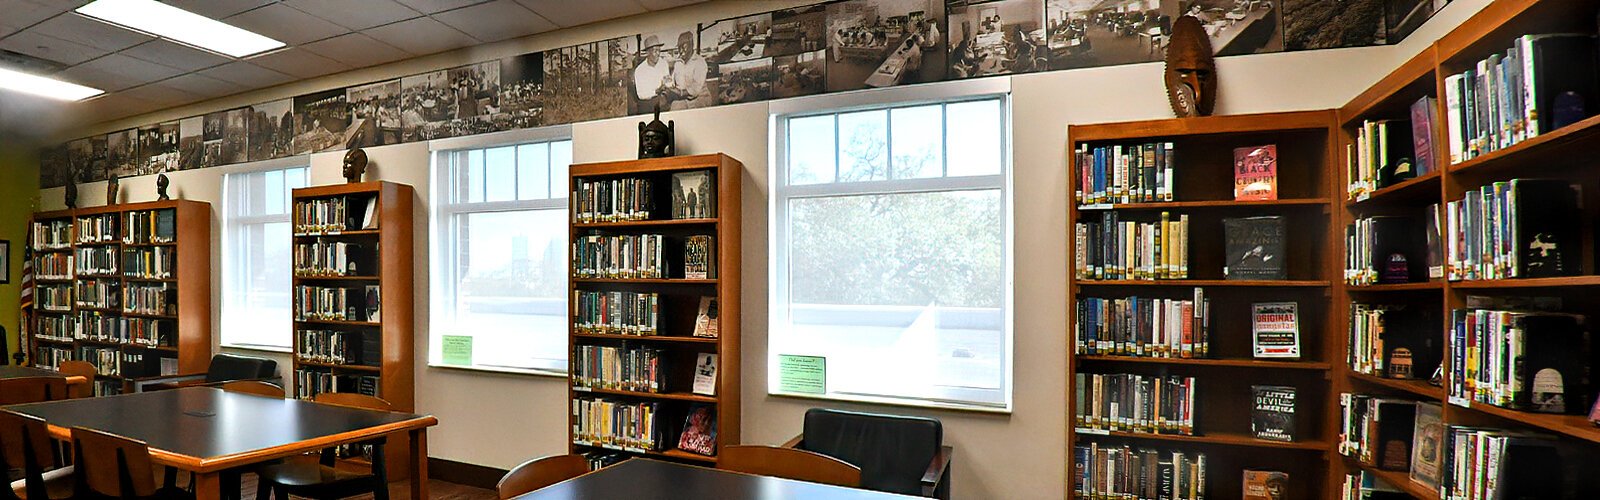 Enhanced with a display of authentic African art, the African American History & Genealogy Library at the Robert W. Saunders, Sr. Public Library features titles on African American life, history and culture and a genealogy reference collection.